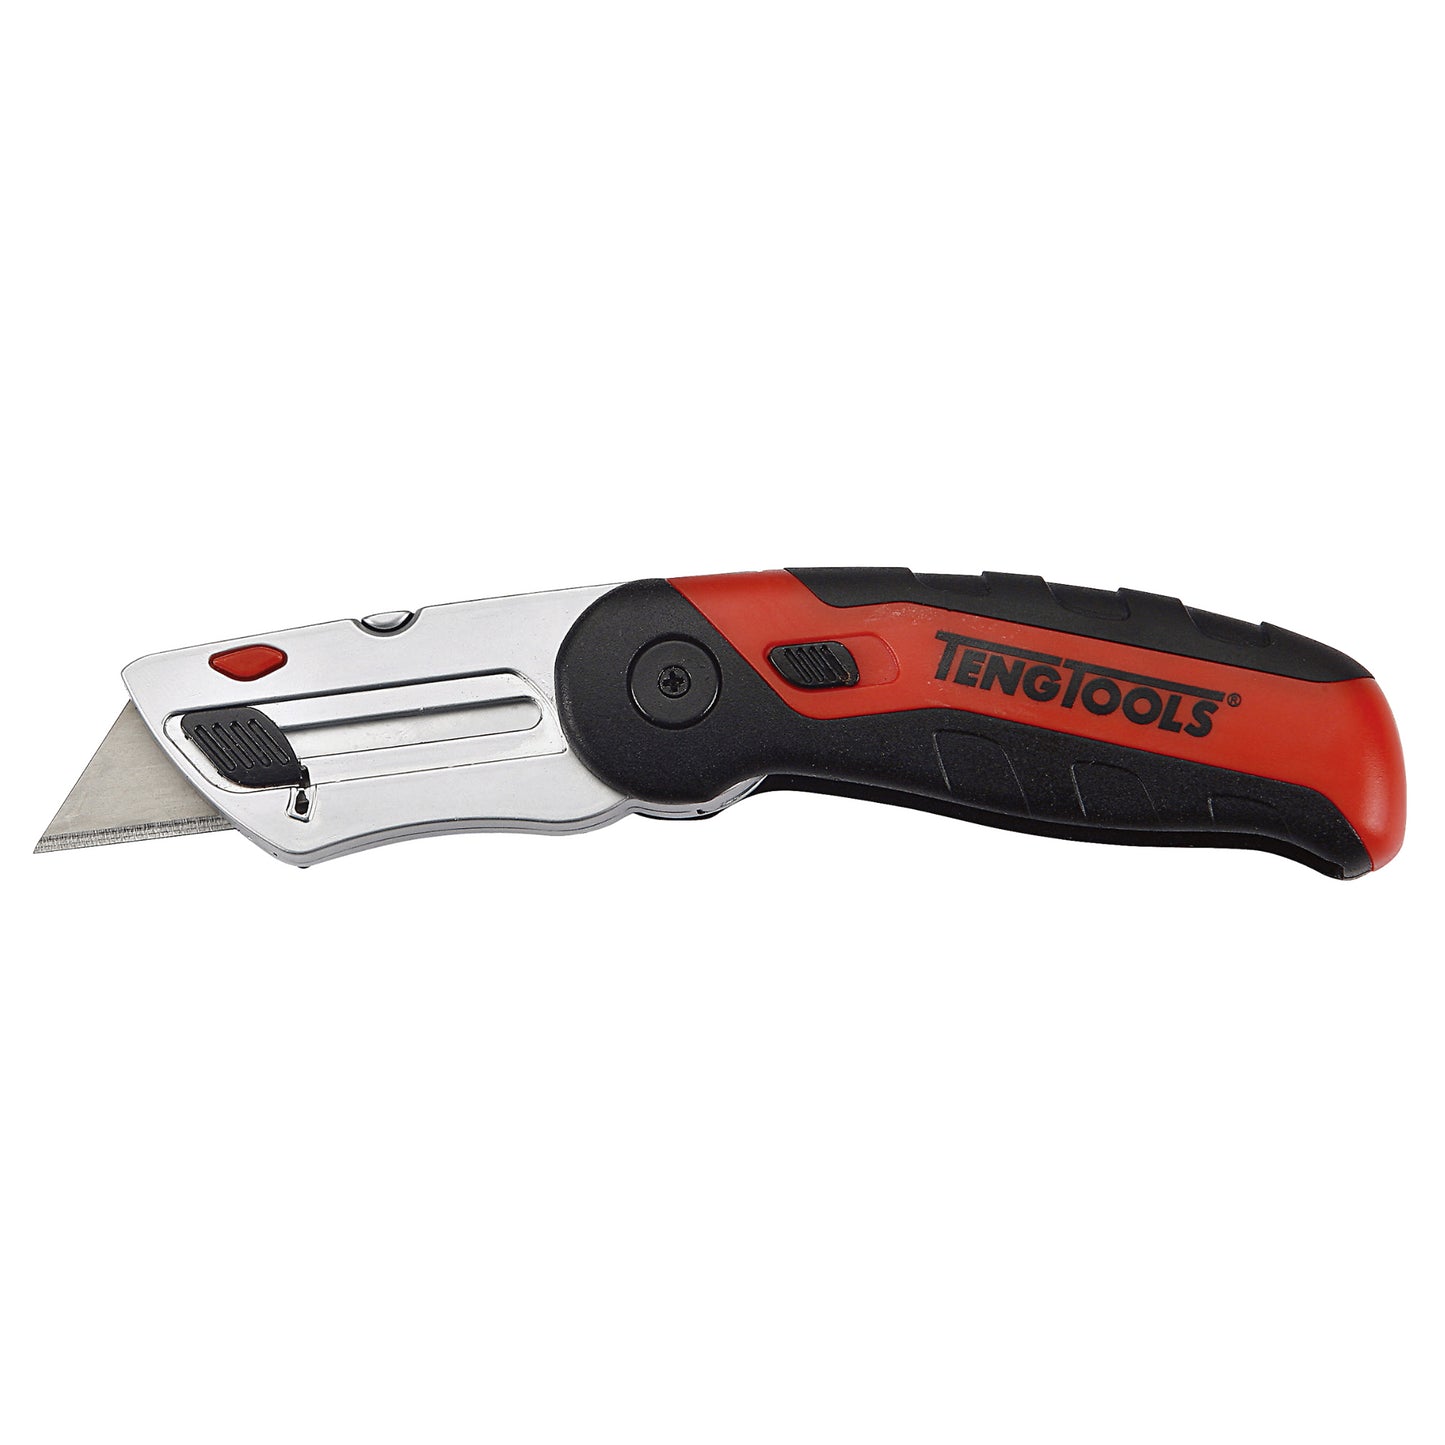 Teng Tools Folding Universal Utility Knife / Box Cutters with Fixed Blade - 712